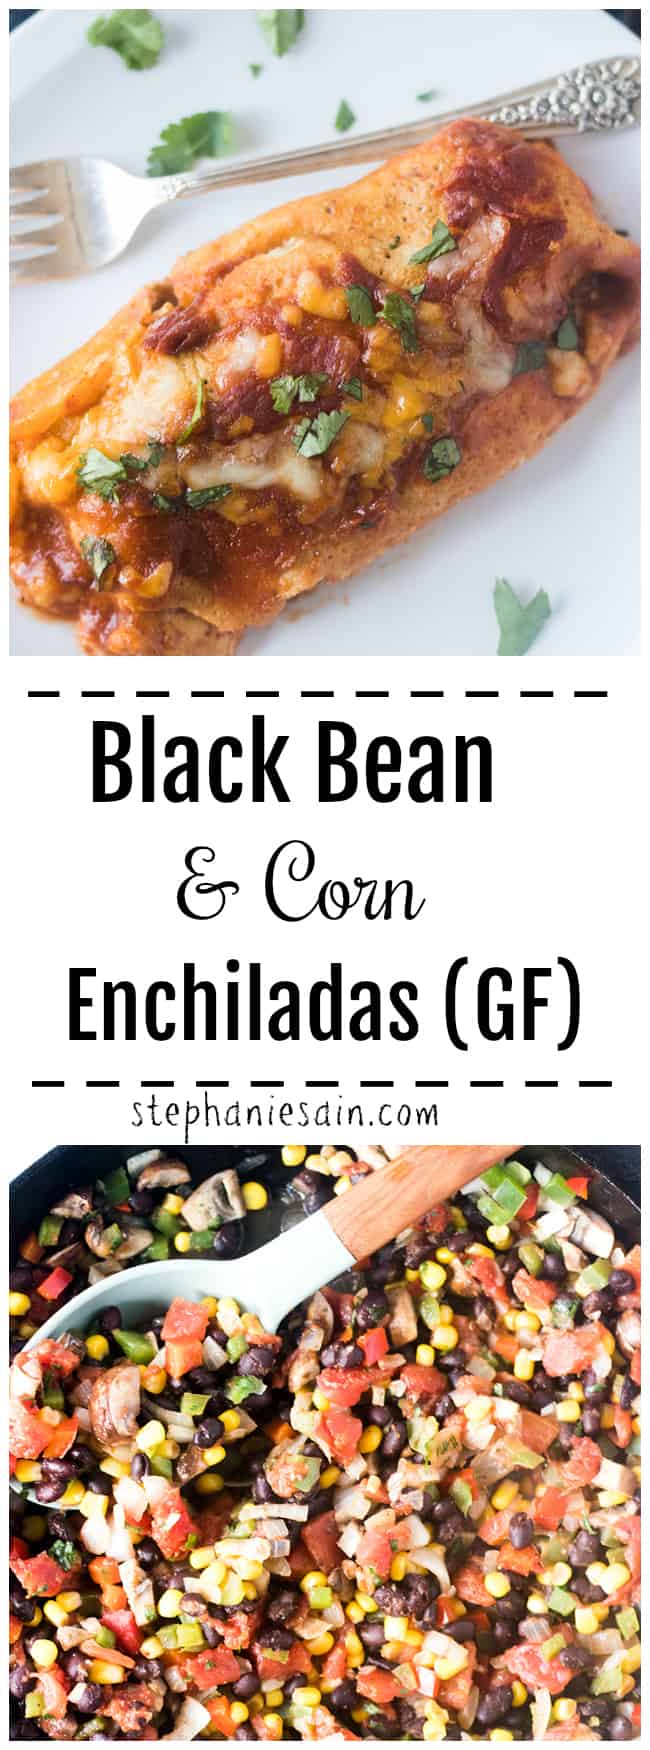 These Vegetarian Enchiladas are made with black beans, corn, bell peppers, onions and cilantro and topped with homemade enchilada sauce. Can be made ahead and re-heated. Perfect for a tasty vegetarian family friendly dinner. Gluten Free.